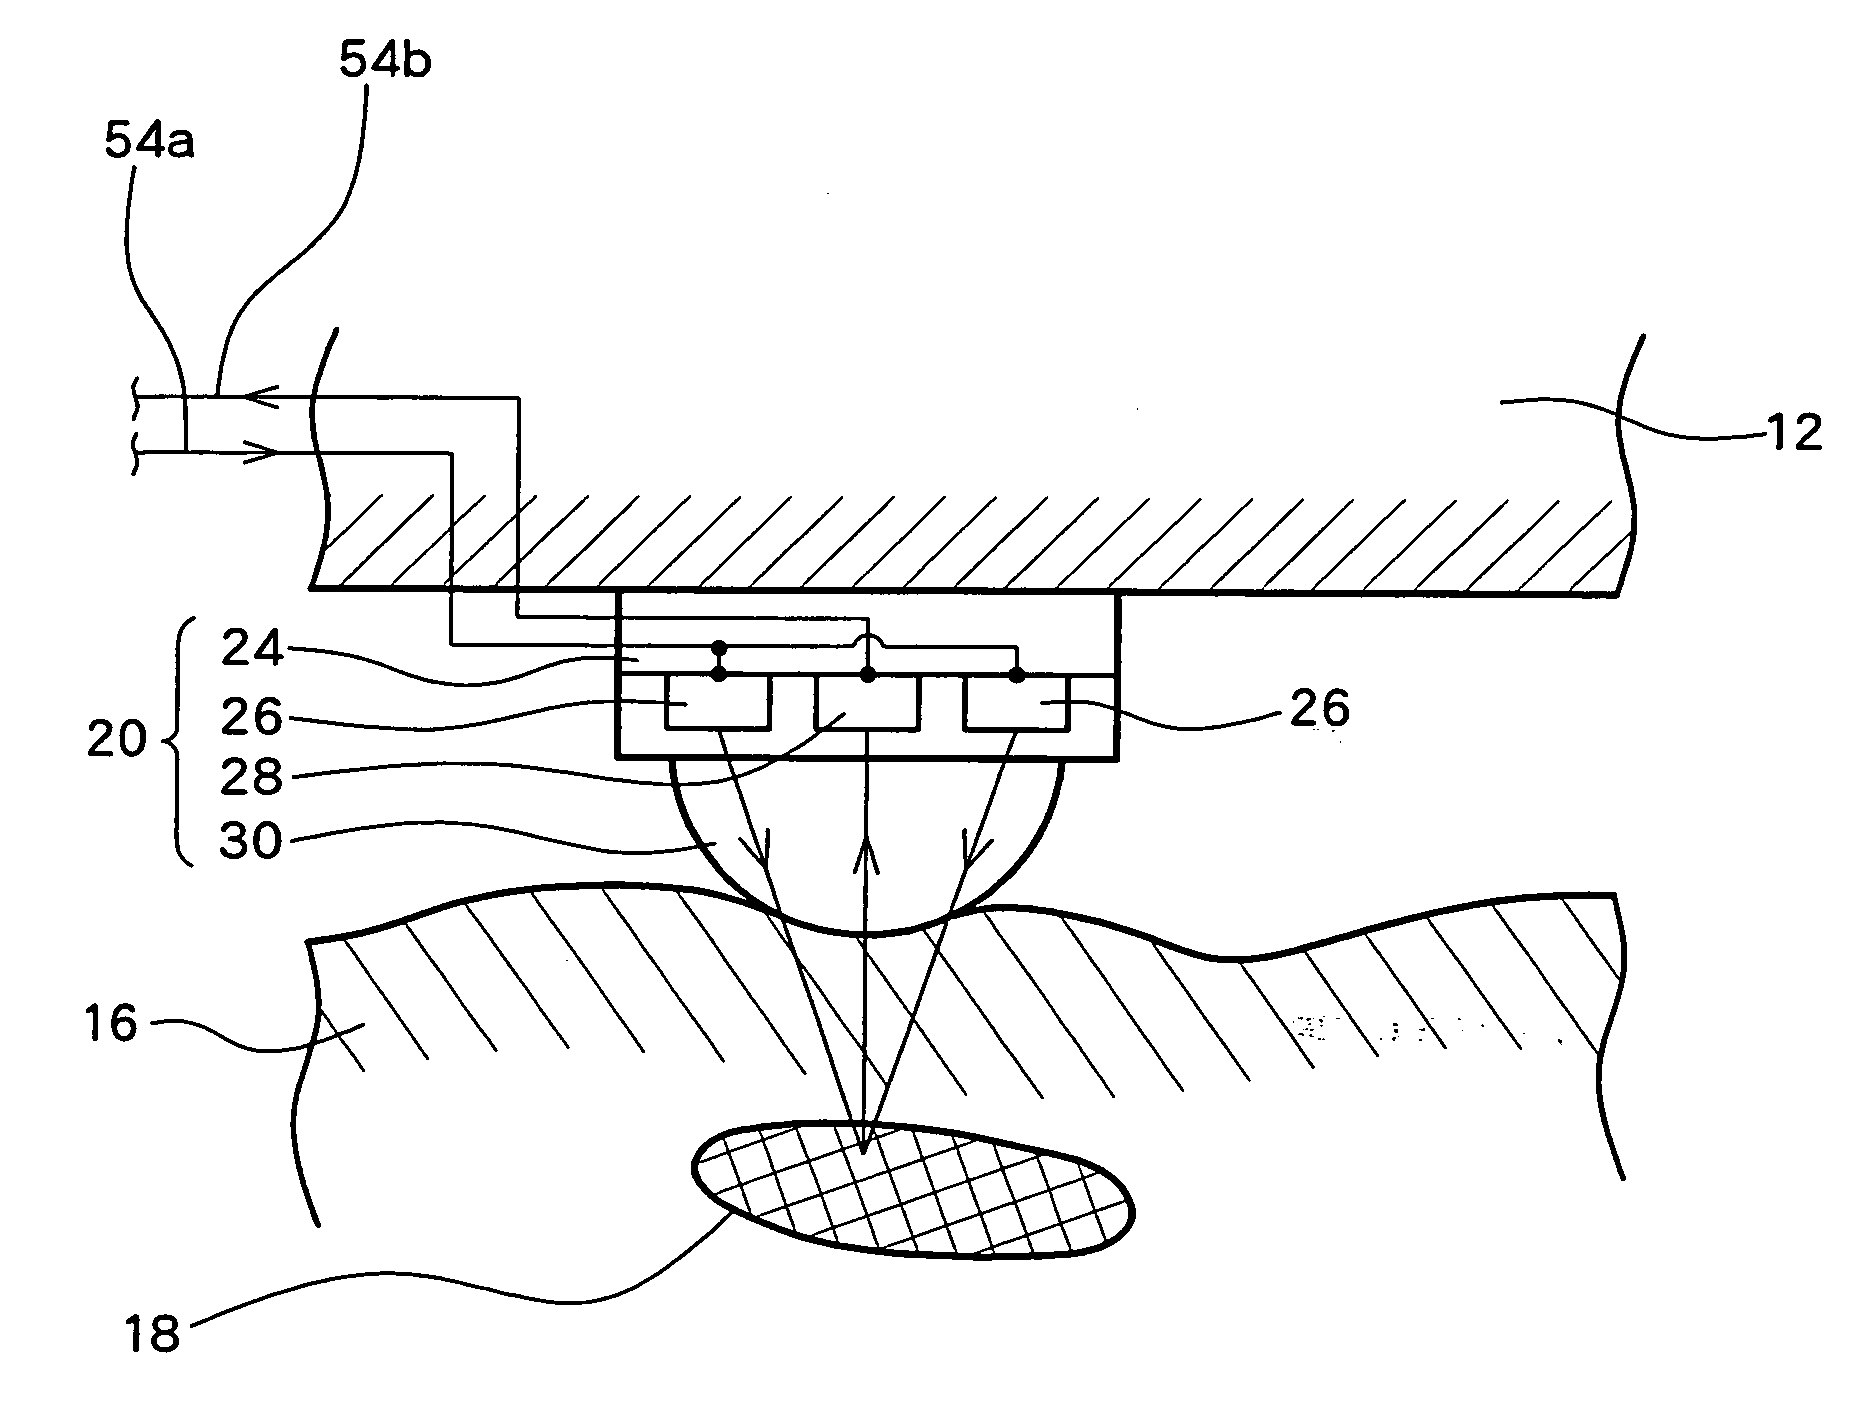 Biological Property Check Device Using Light